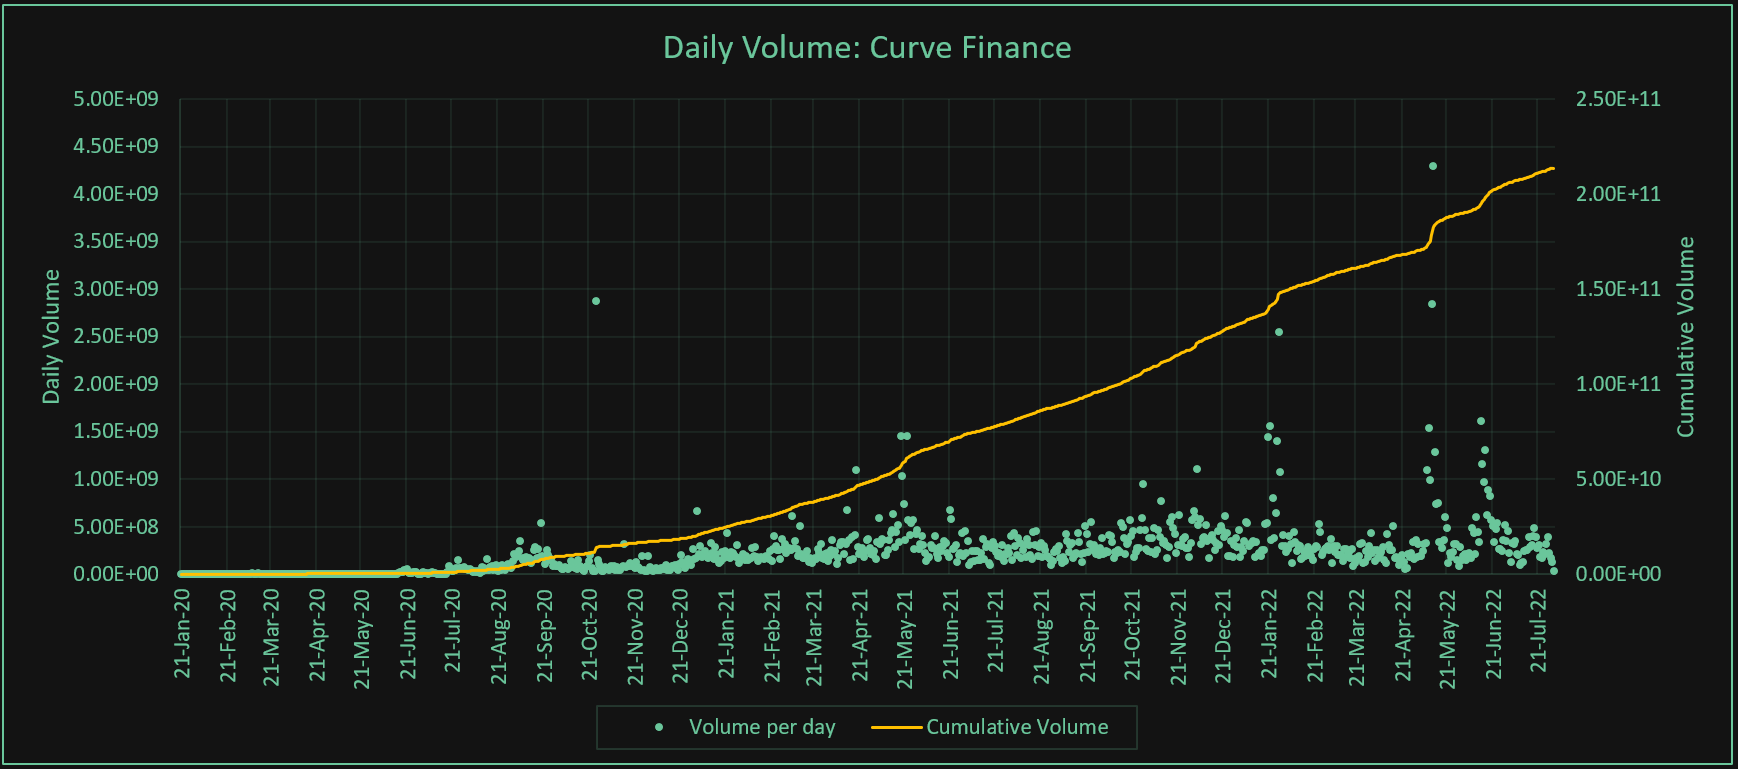 Daily volume data for Curve Finance